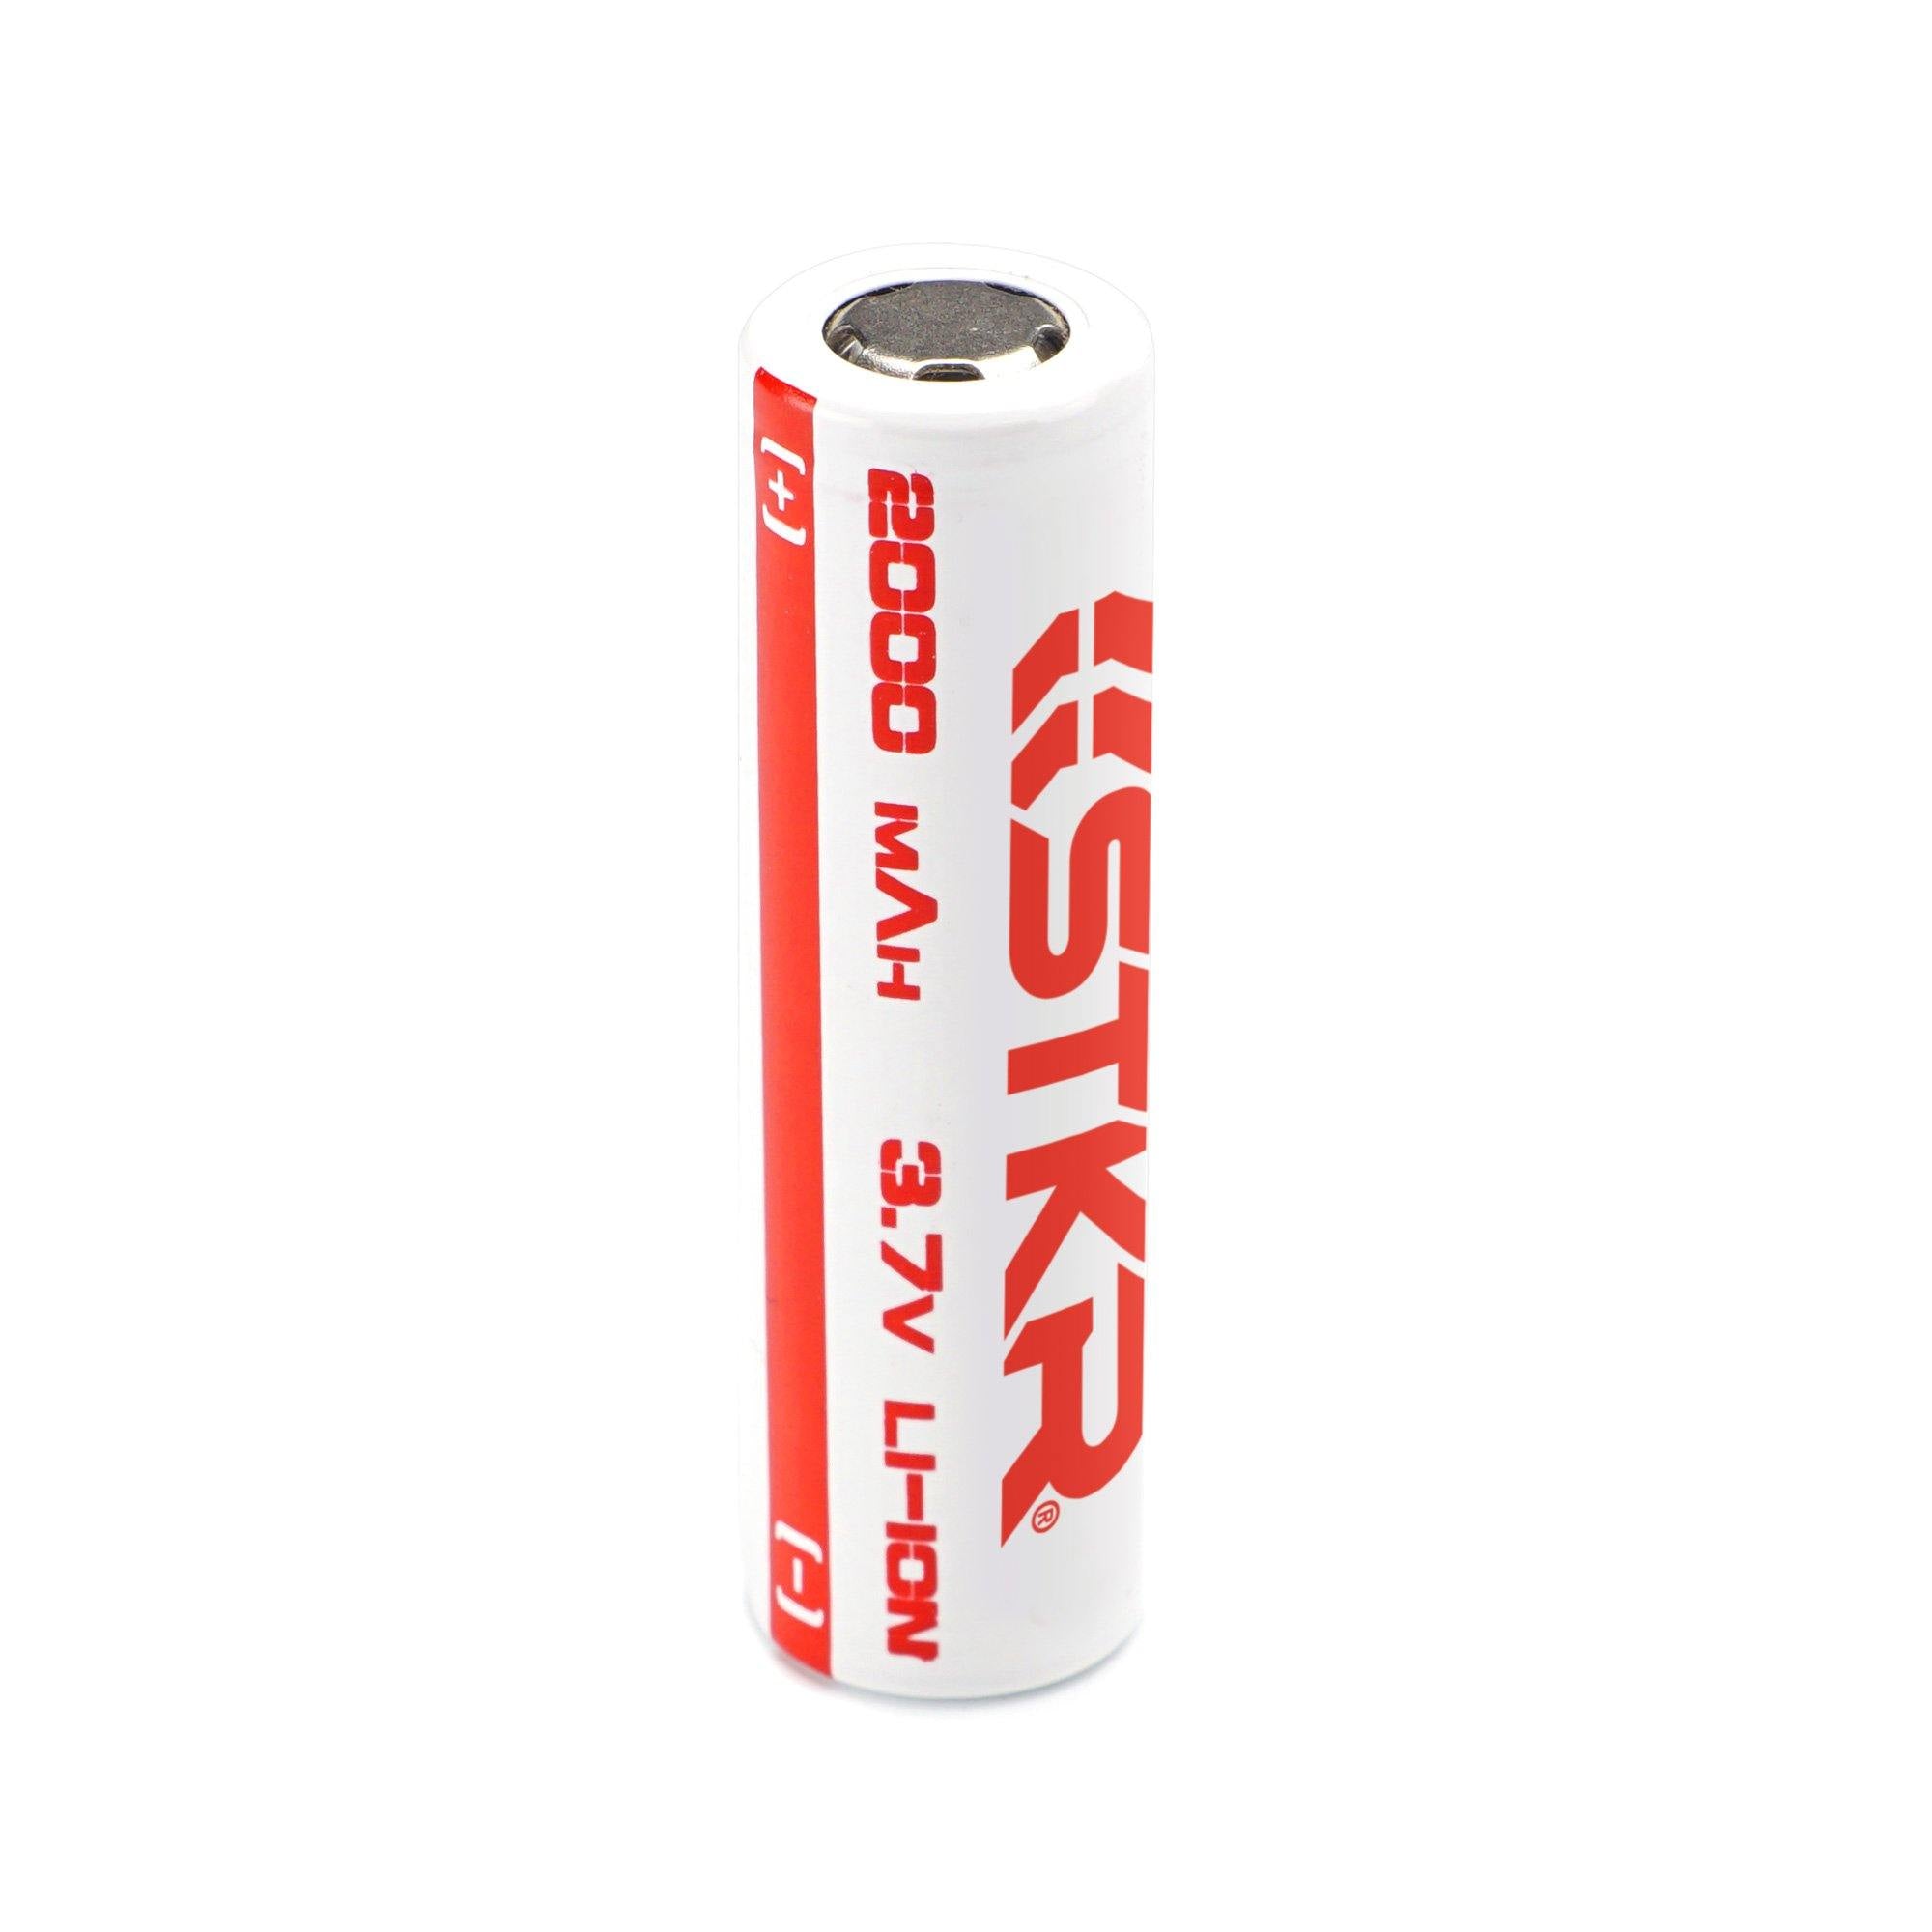 18650 lithium-ion 2000mah rechargeable battery | STKR Striker